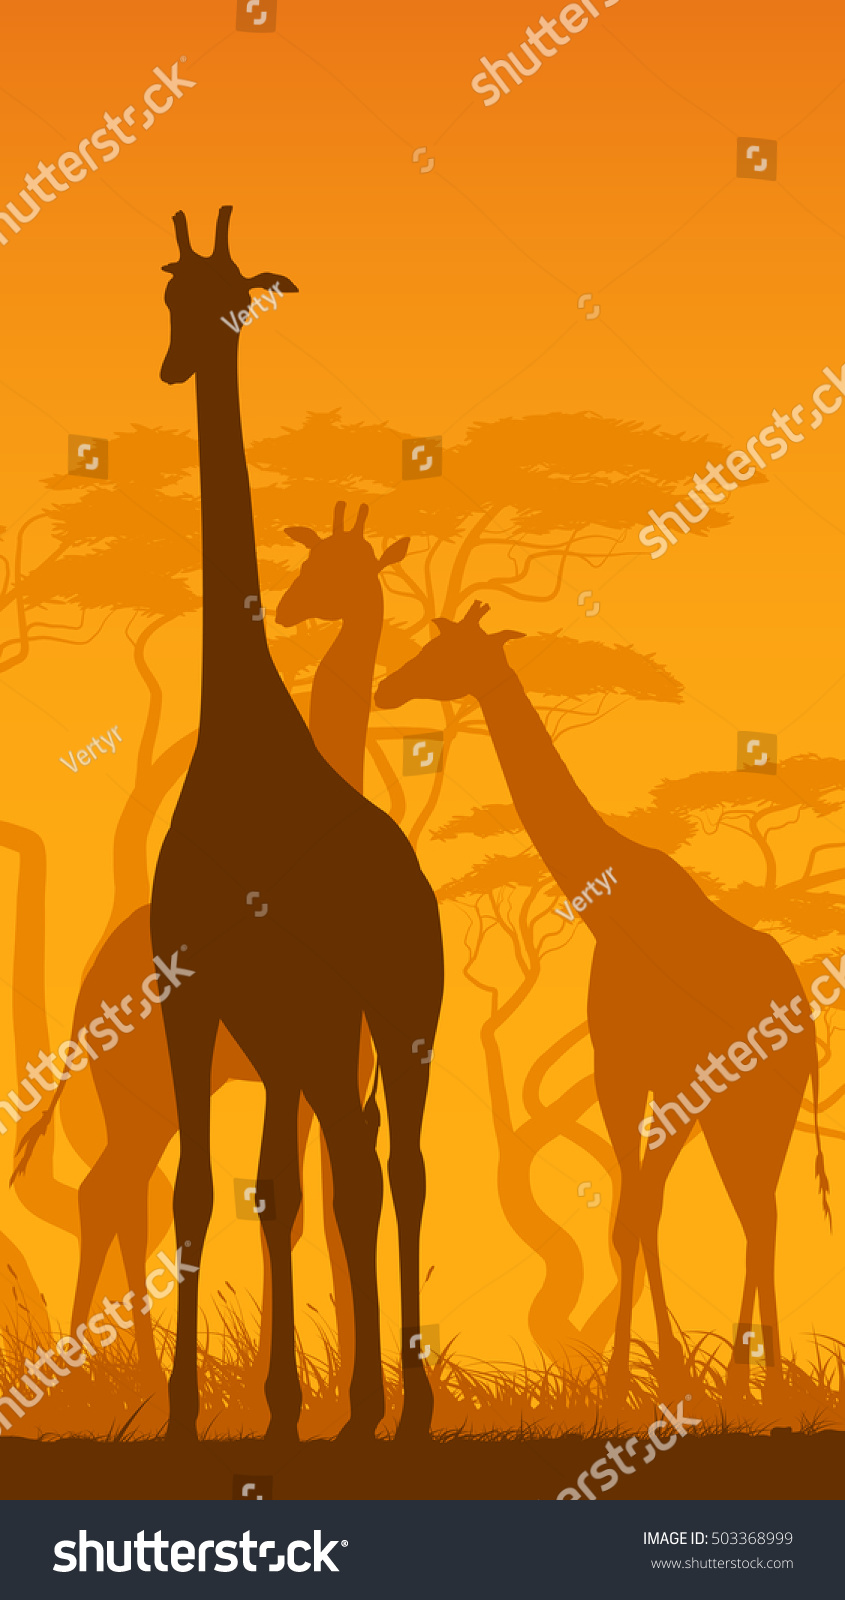 Vertical vector illustration of wild giraffes in African savanna with trees. #503368999